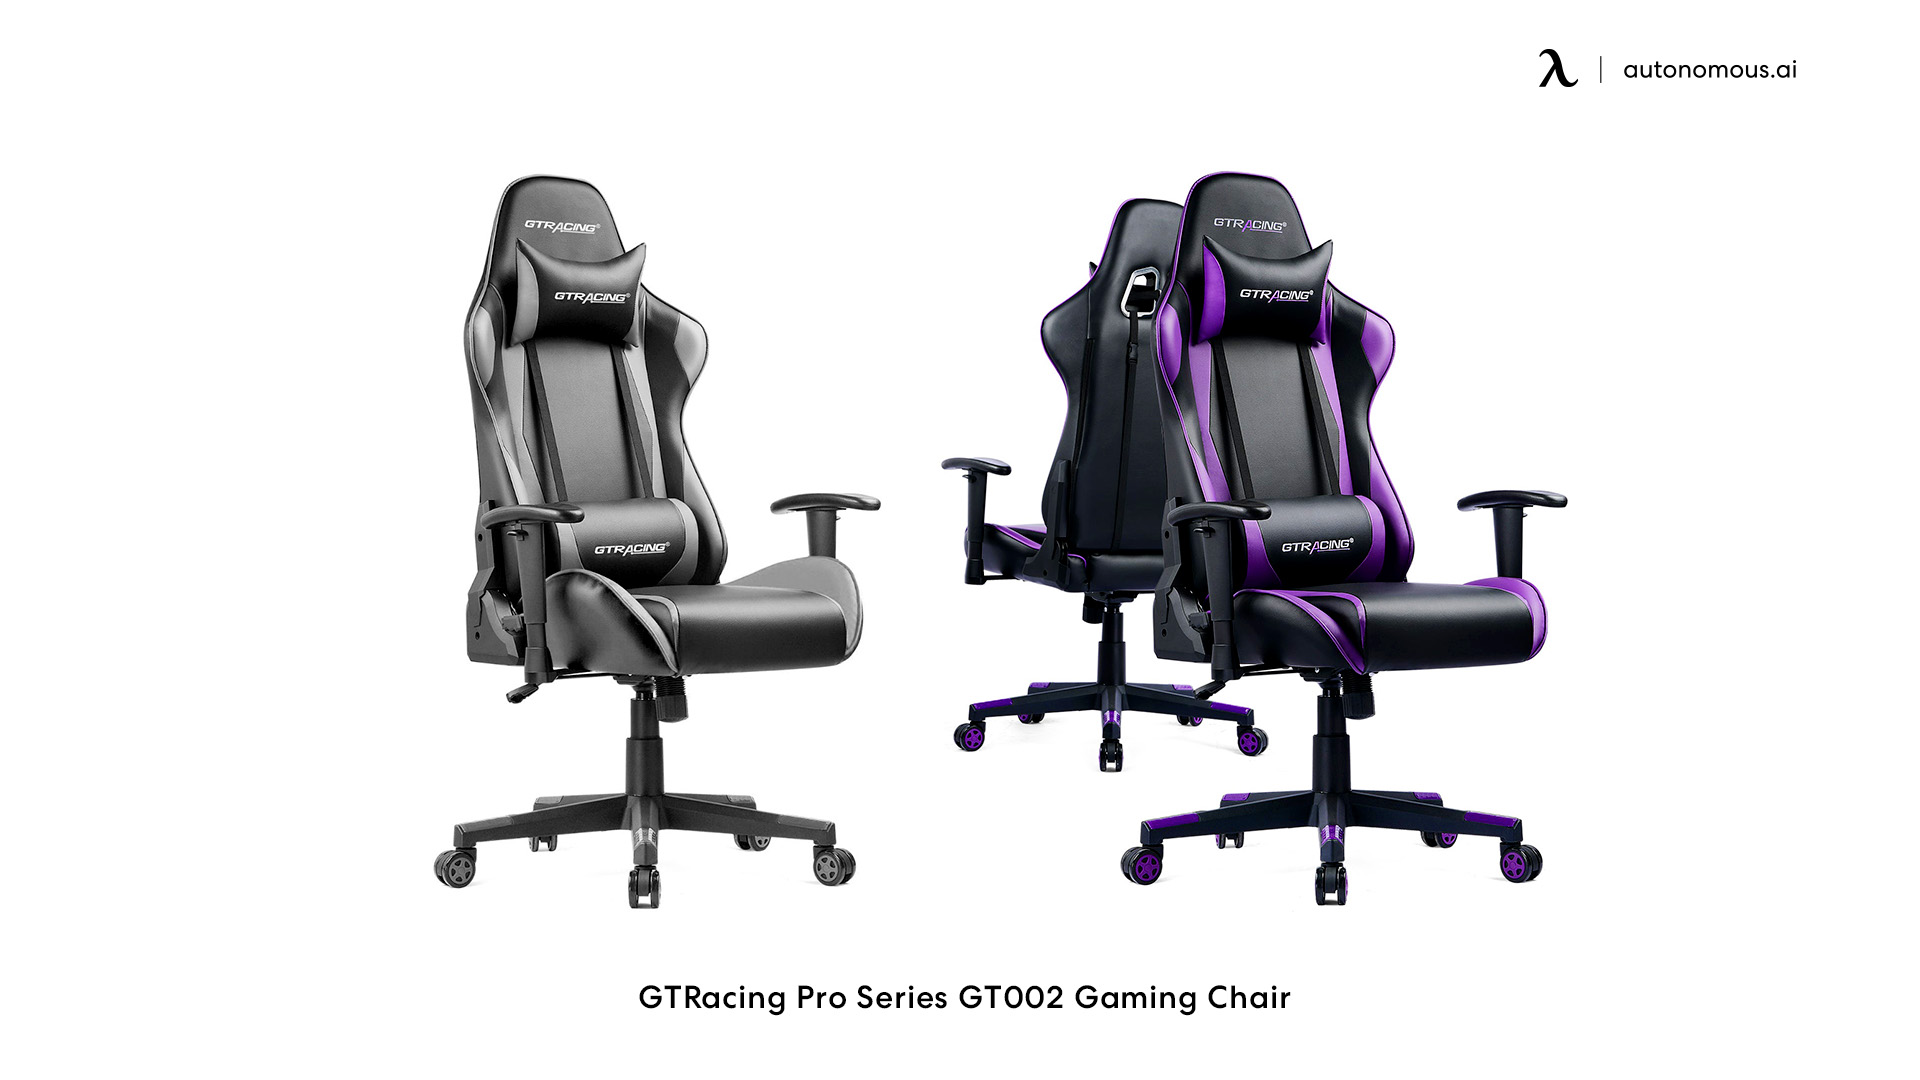 GTRacing Pro Series GT002 high back gaming chair